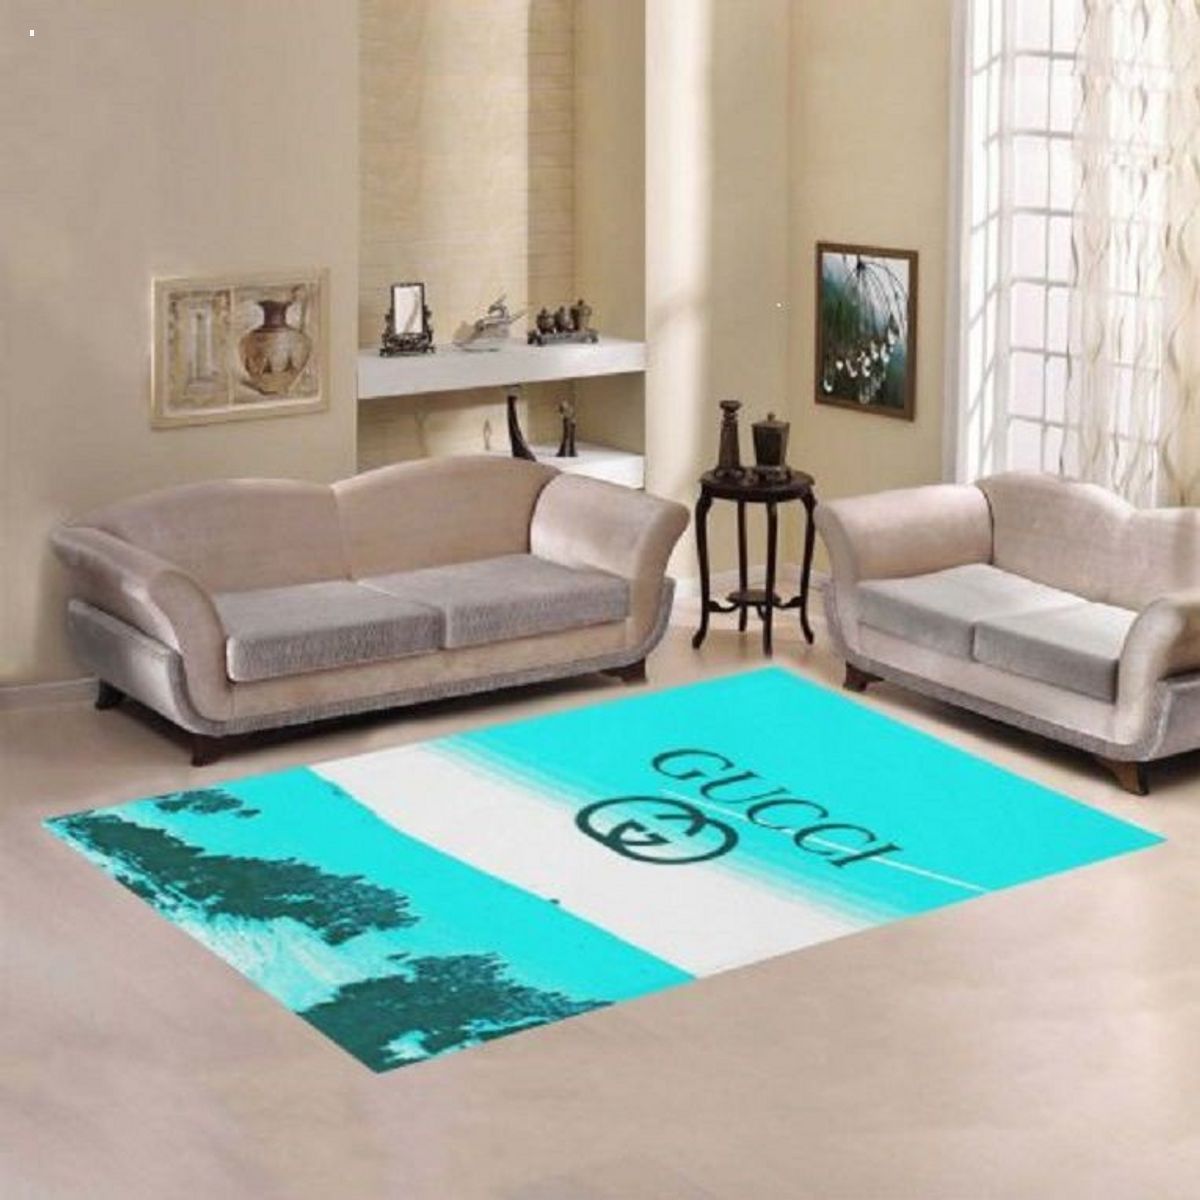 Gucci Blue Mix White Living Room Bedroom Luxury Brand Carpet Rug Limited Edition